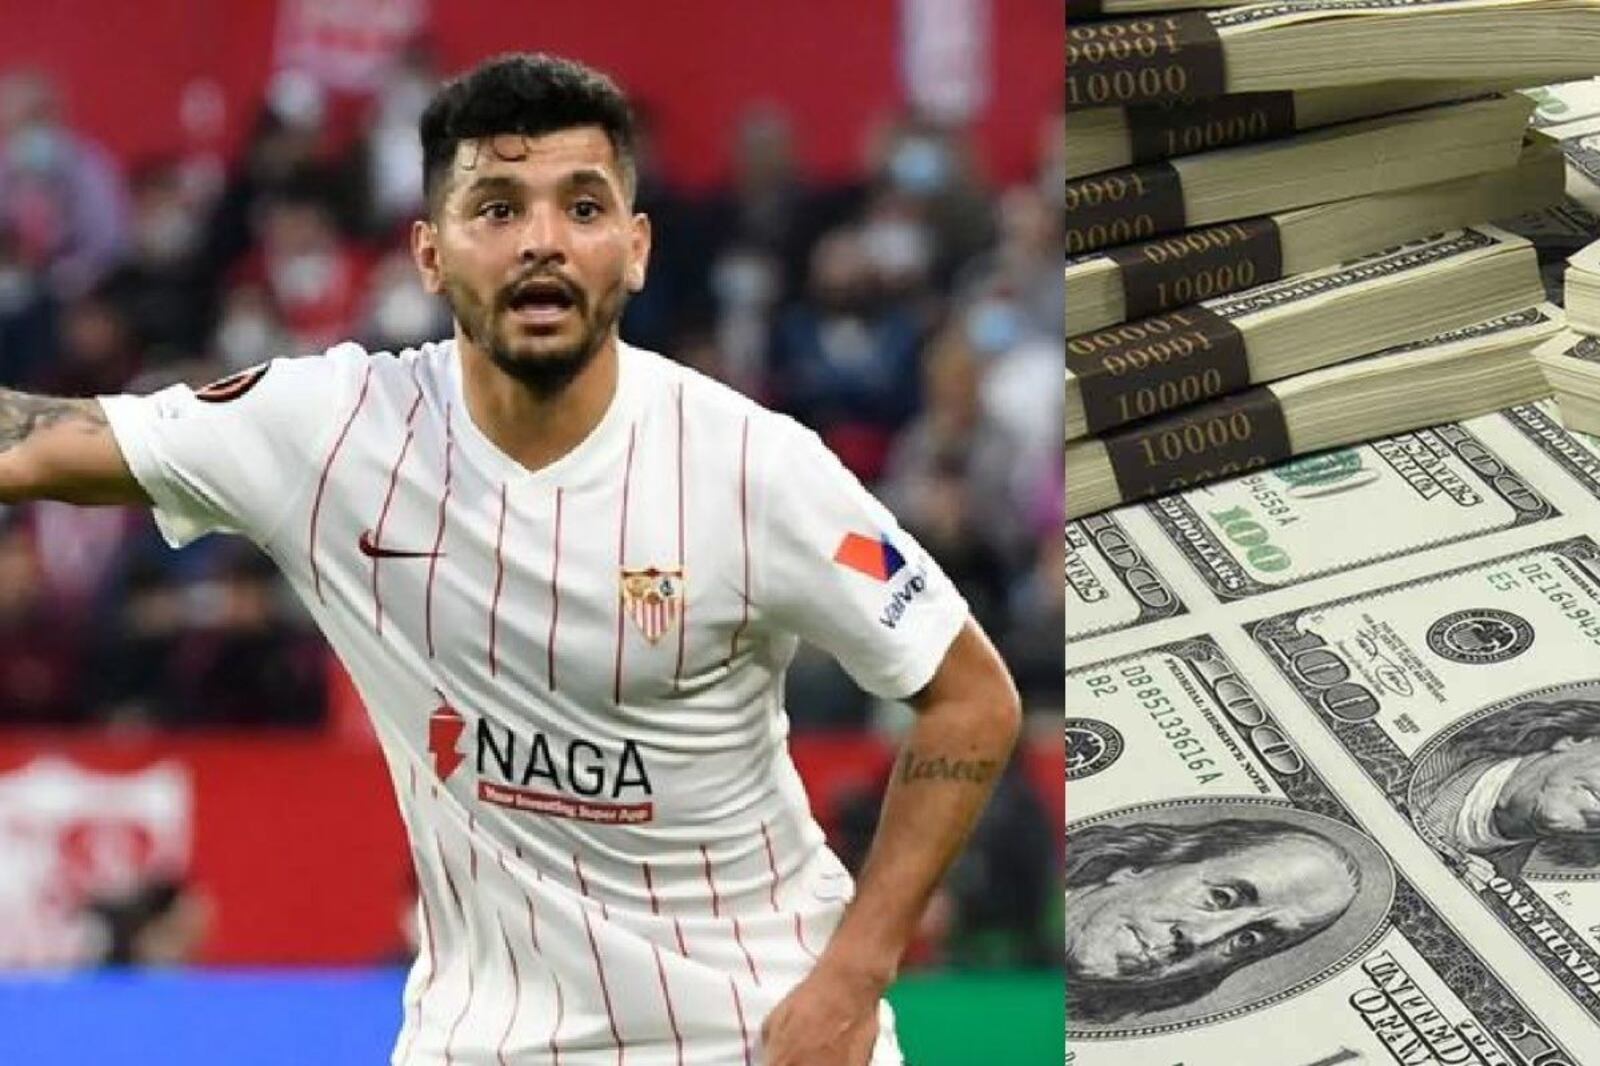 If worth 19 million euros, this is the new value of Tecatito Corona for not playing